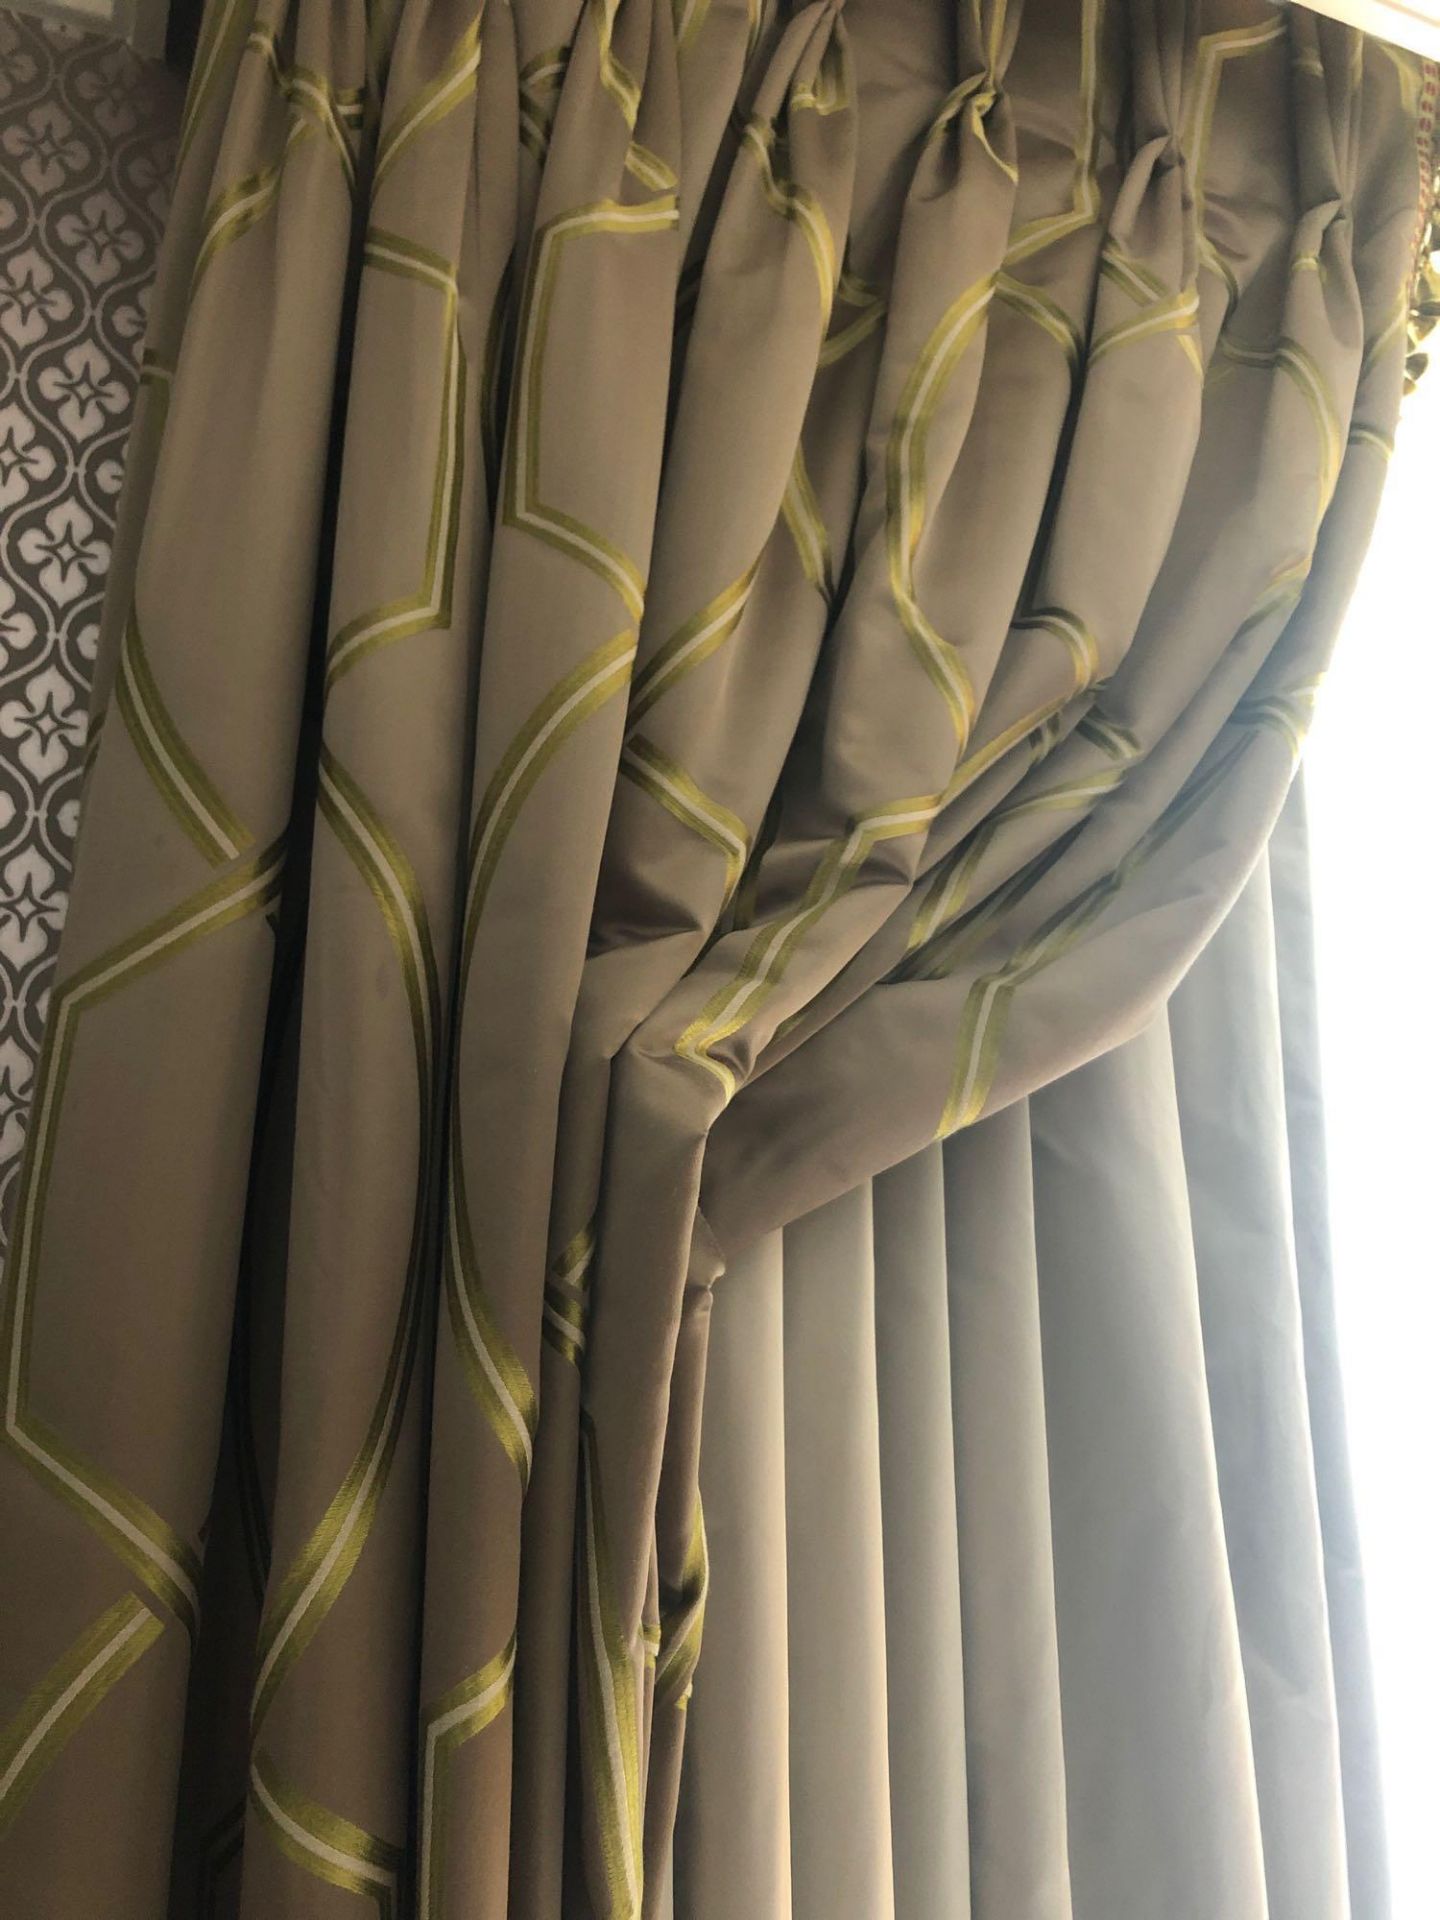 A Pair Of Gold And Silver Silk Drapes And Jabots With Tie Backs Span 250 x 215cm (Room 529) - Bild 2 aus 2